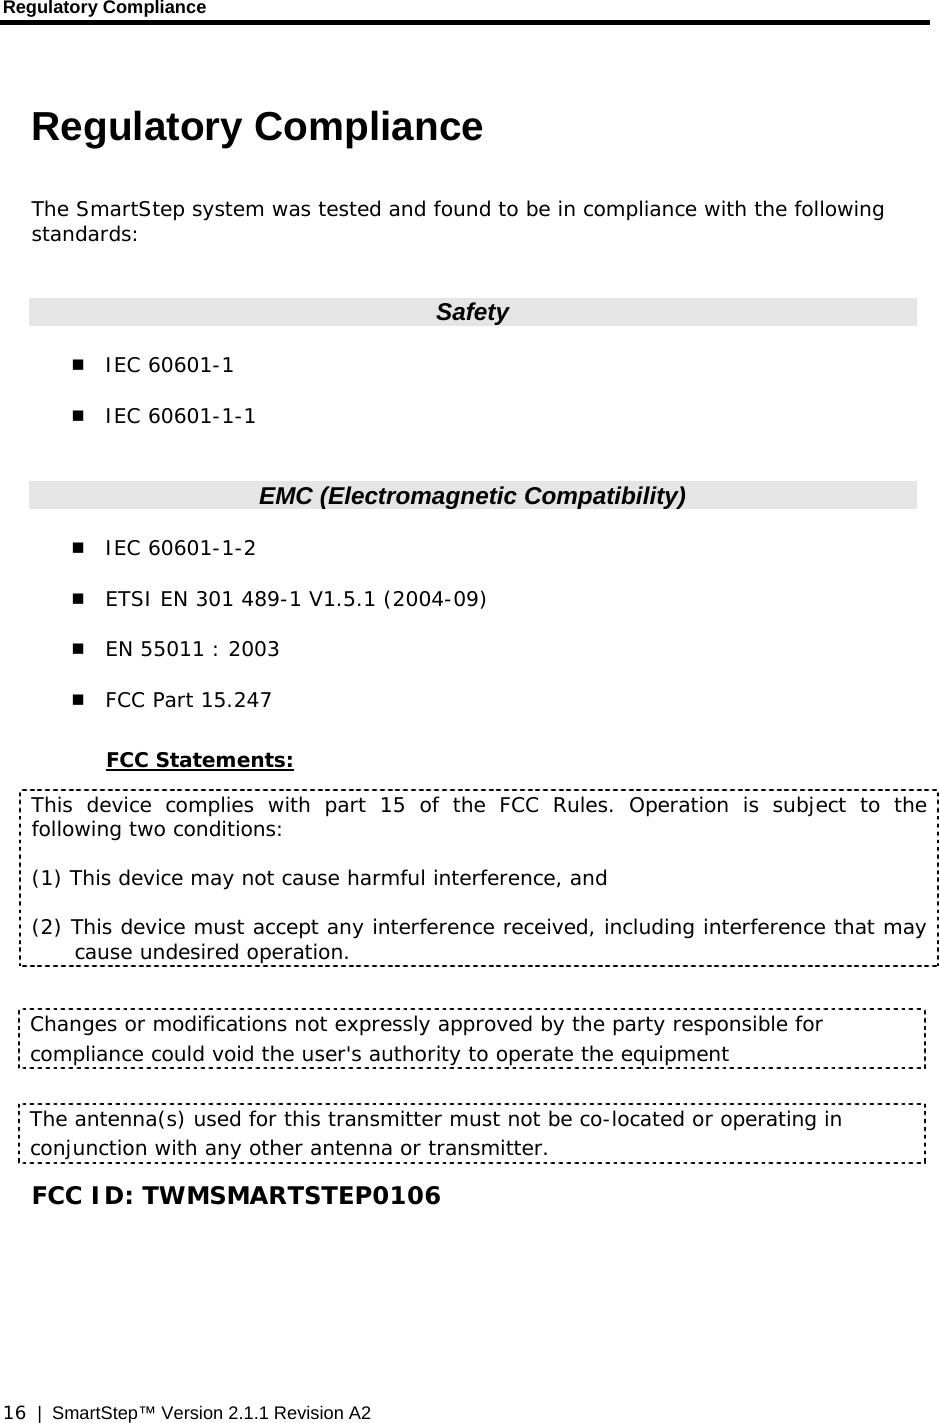 Regulatory Compliance  16  |  SmartStep™ Version 2.1.1 Revision A2 Regulatory Compliance  The SmartStep system was tested and found to be in compliance with the following standards:  Safety  IEC 60601-1  IEC 60601-1-1  EMC (Electromagnetic Compatibility)  IEC 60601-1-2  ETSI EN 301 489-1 V1.5.1 (2004-09)  EN 55011 : 2003  FCC Part 15.247  FCC Statements: This device complies with part 15 of the FCC Rules. Operation is subject to the following two conditions:  (1) This device may not cause harmful interference, and (2) This device must accept any interference received, including interference that may cause undesired operation.  Changes or modifications not expressly approved by the party responsible for compliance could void the user&apos;s authority to operate the equipment  The antenna(s) used for this transmitter must not be co-located or operating in conjunction with any other antenna or transmitter.  FCC ID: TWMSMARTSTEP0106 